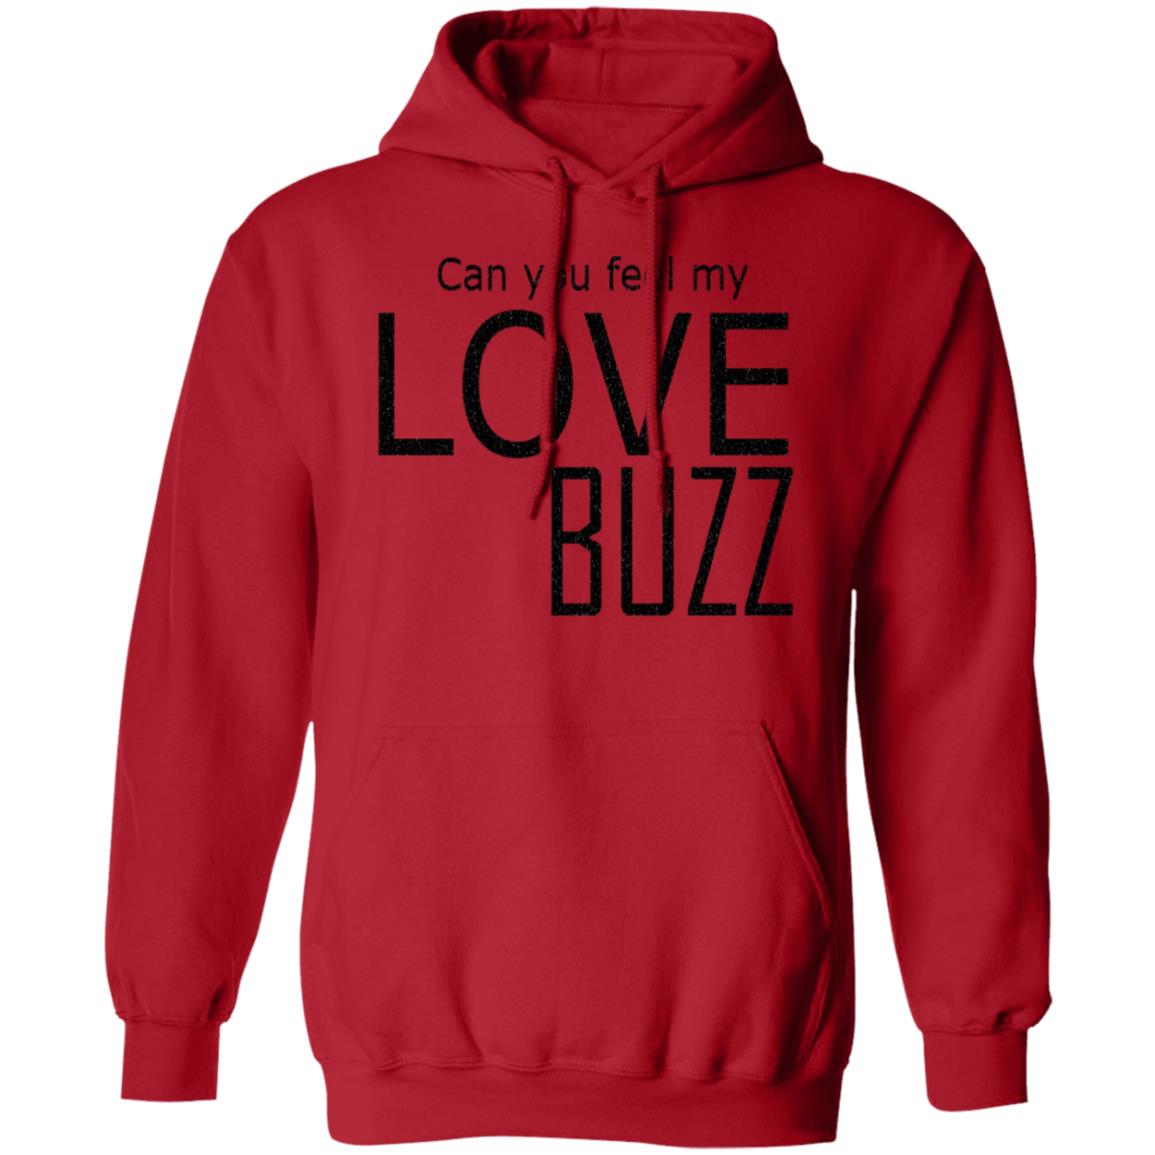 Can You Feel My Love Buzz Hoodie